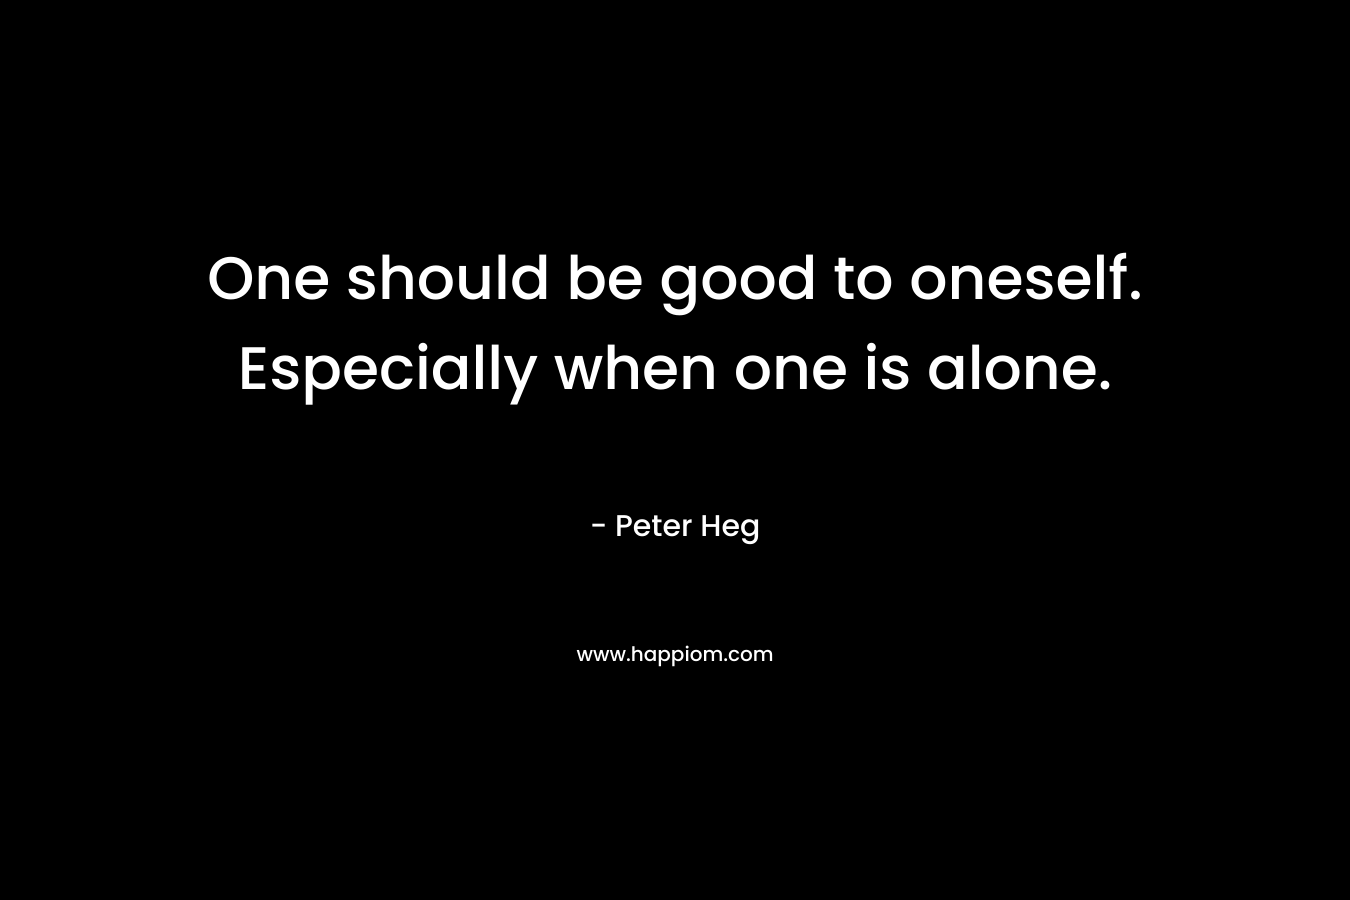 One should be good to oneself. Especially when one is alone.